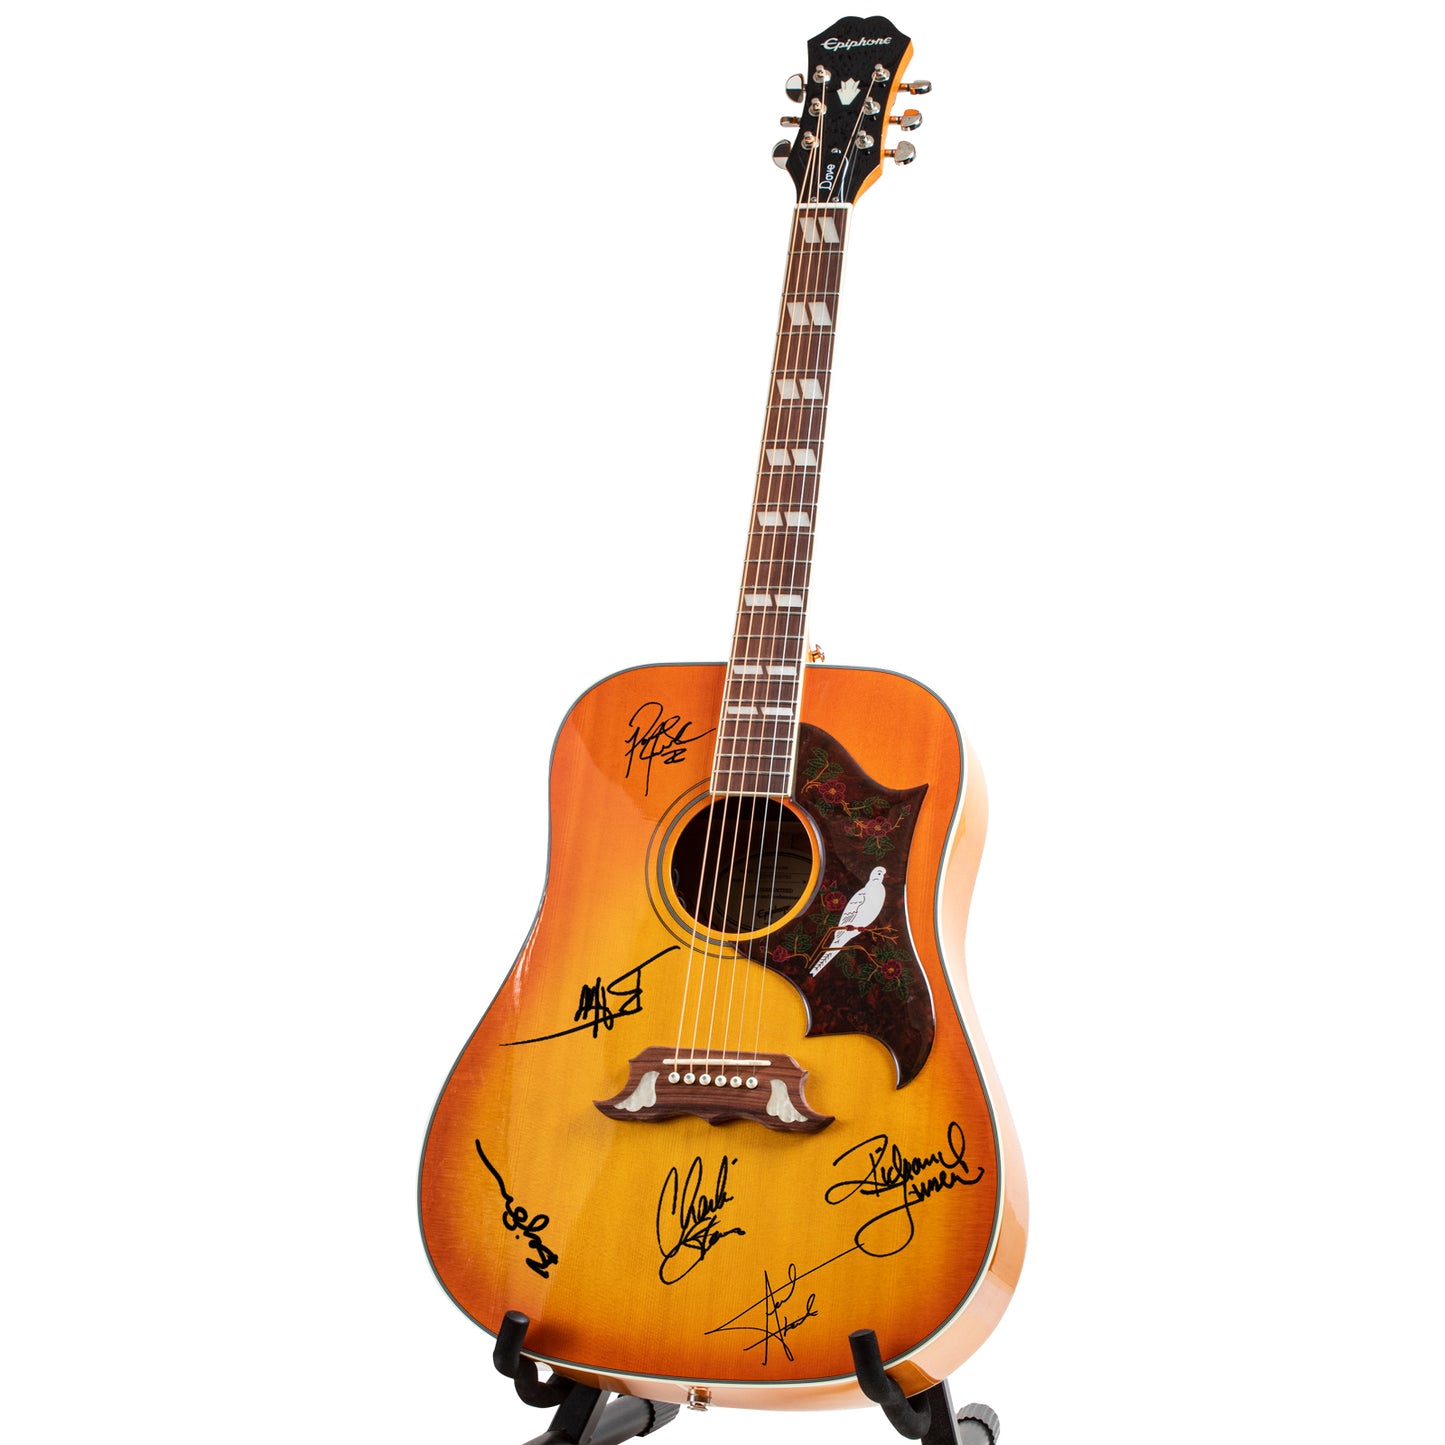 SIGNED ACOUSTIC GUITAR